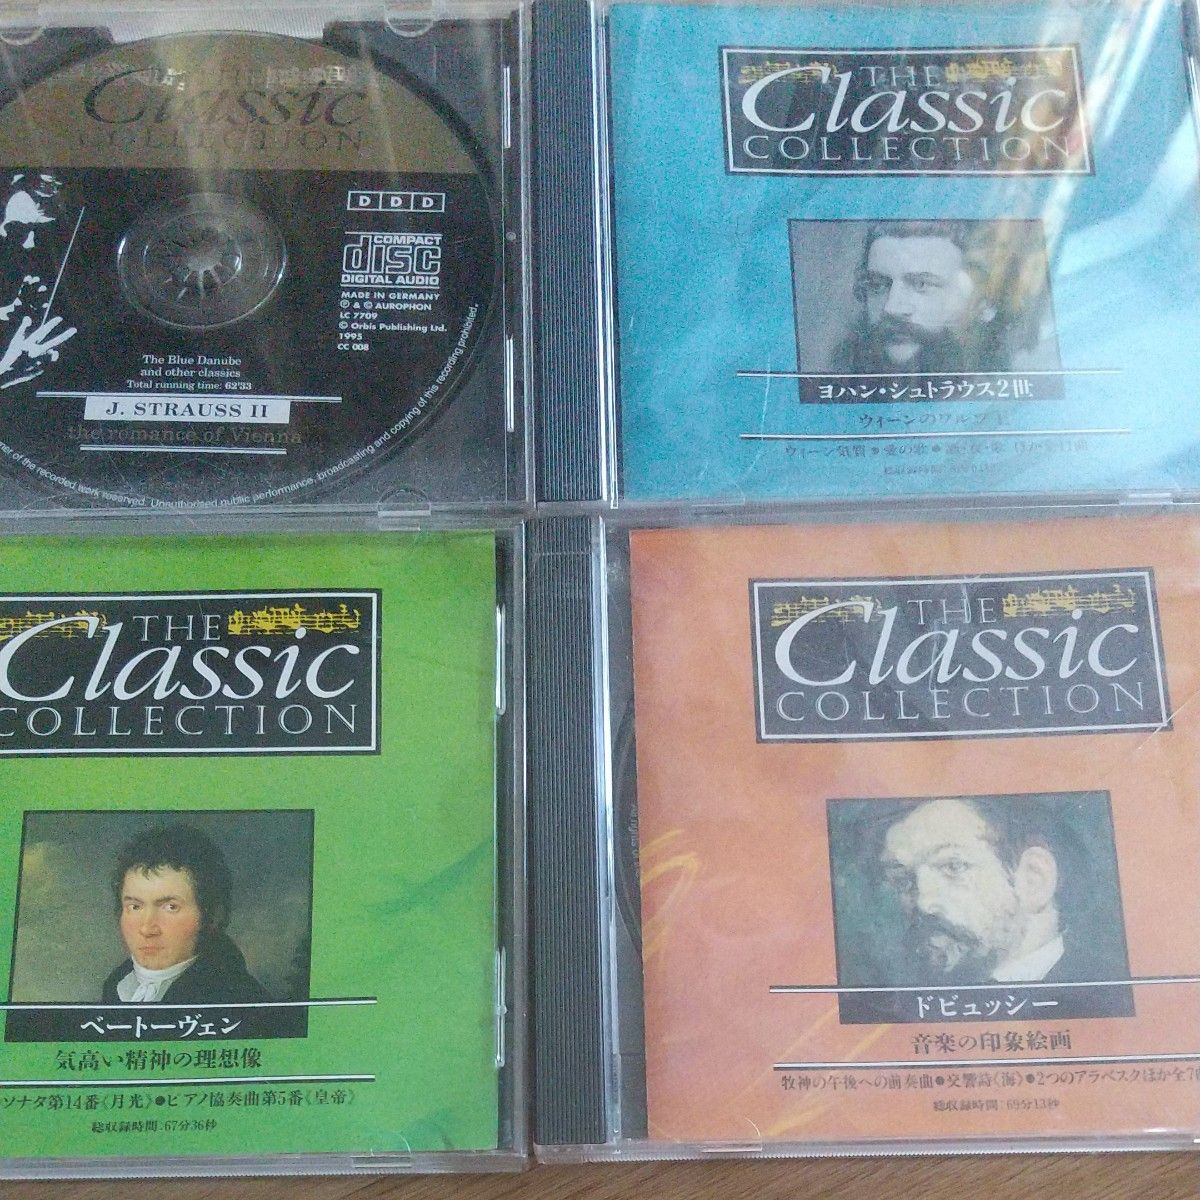 CLASSIC COLLECTION 中古CD４枚組